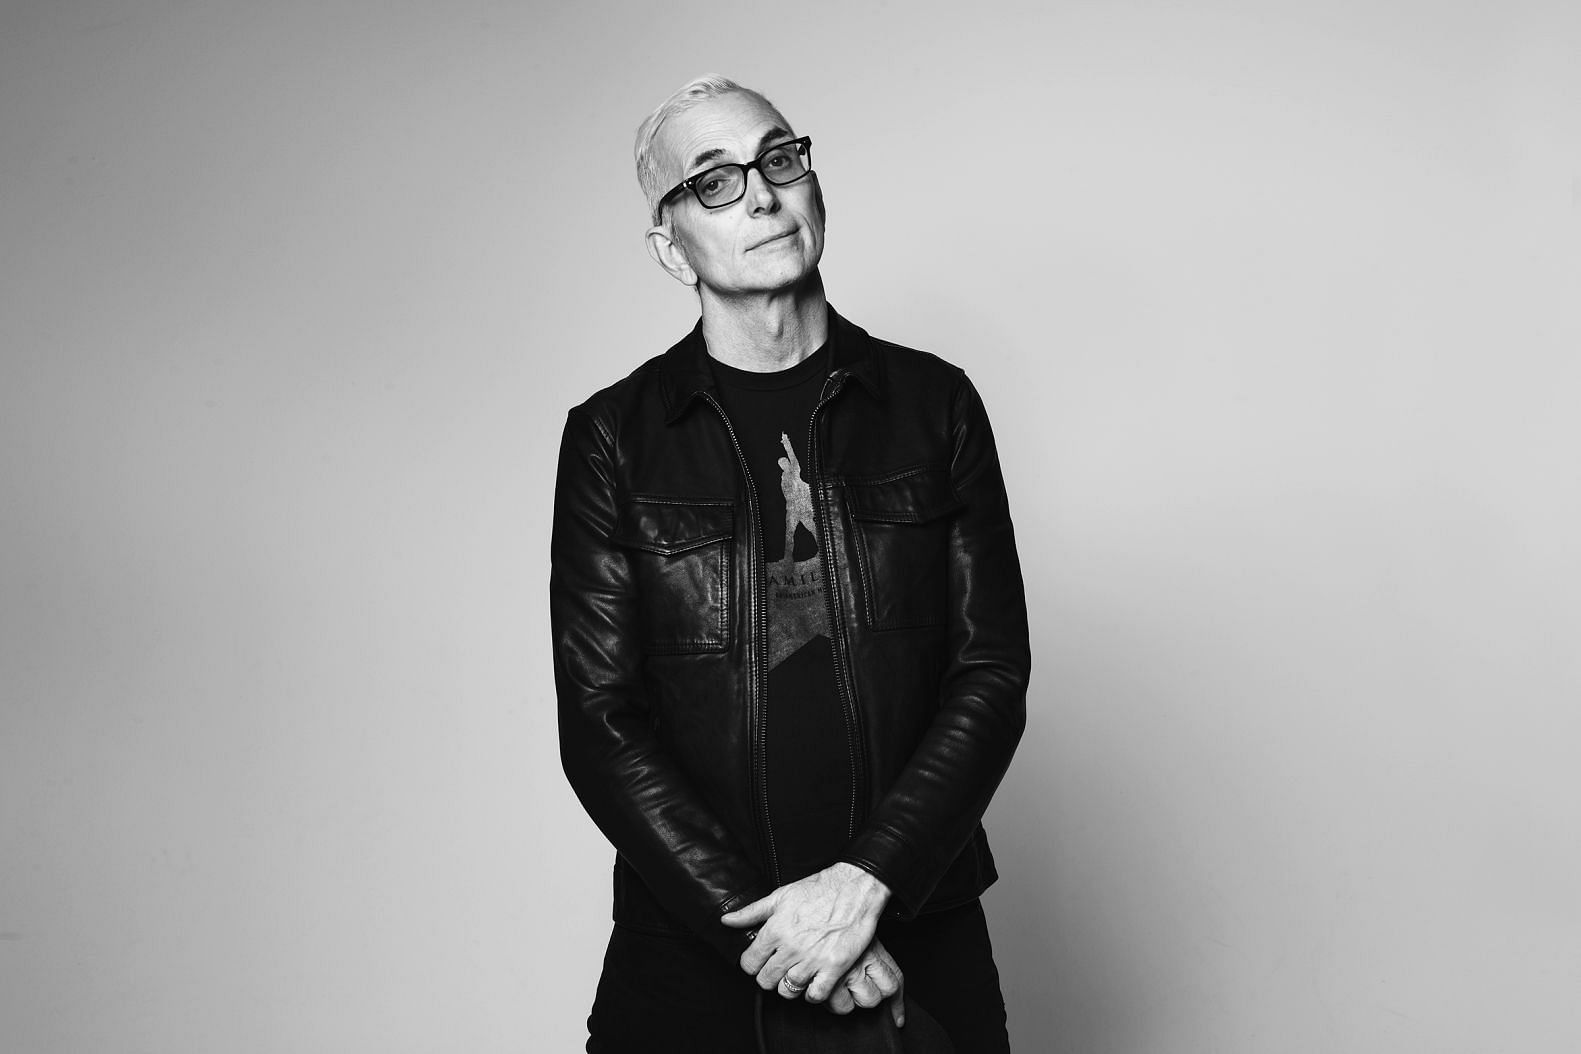 Three years after receiving his MS diagnosis, Art Alexakis, the frontman of the rock band Everclear, shared his experiences and spoke candidly about his condition. (Image via Rolling stone)